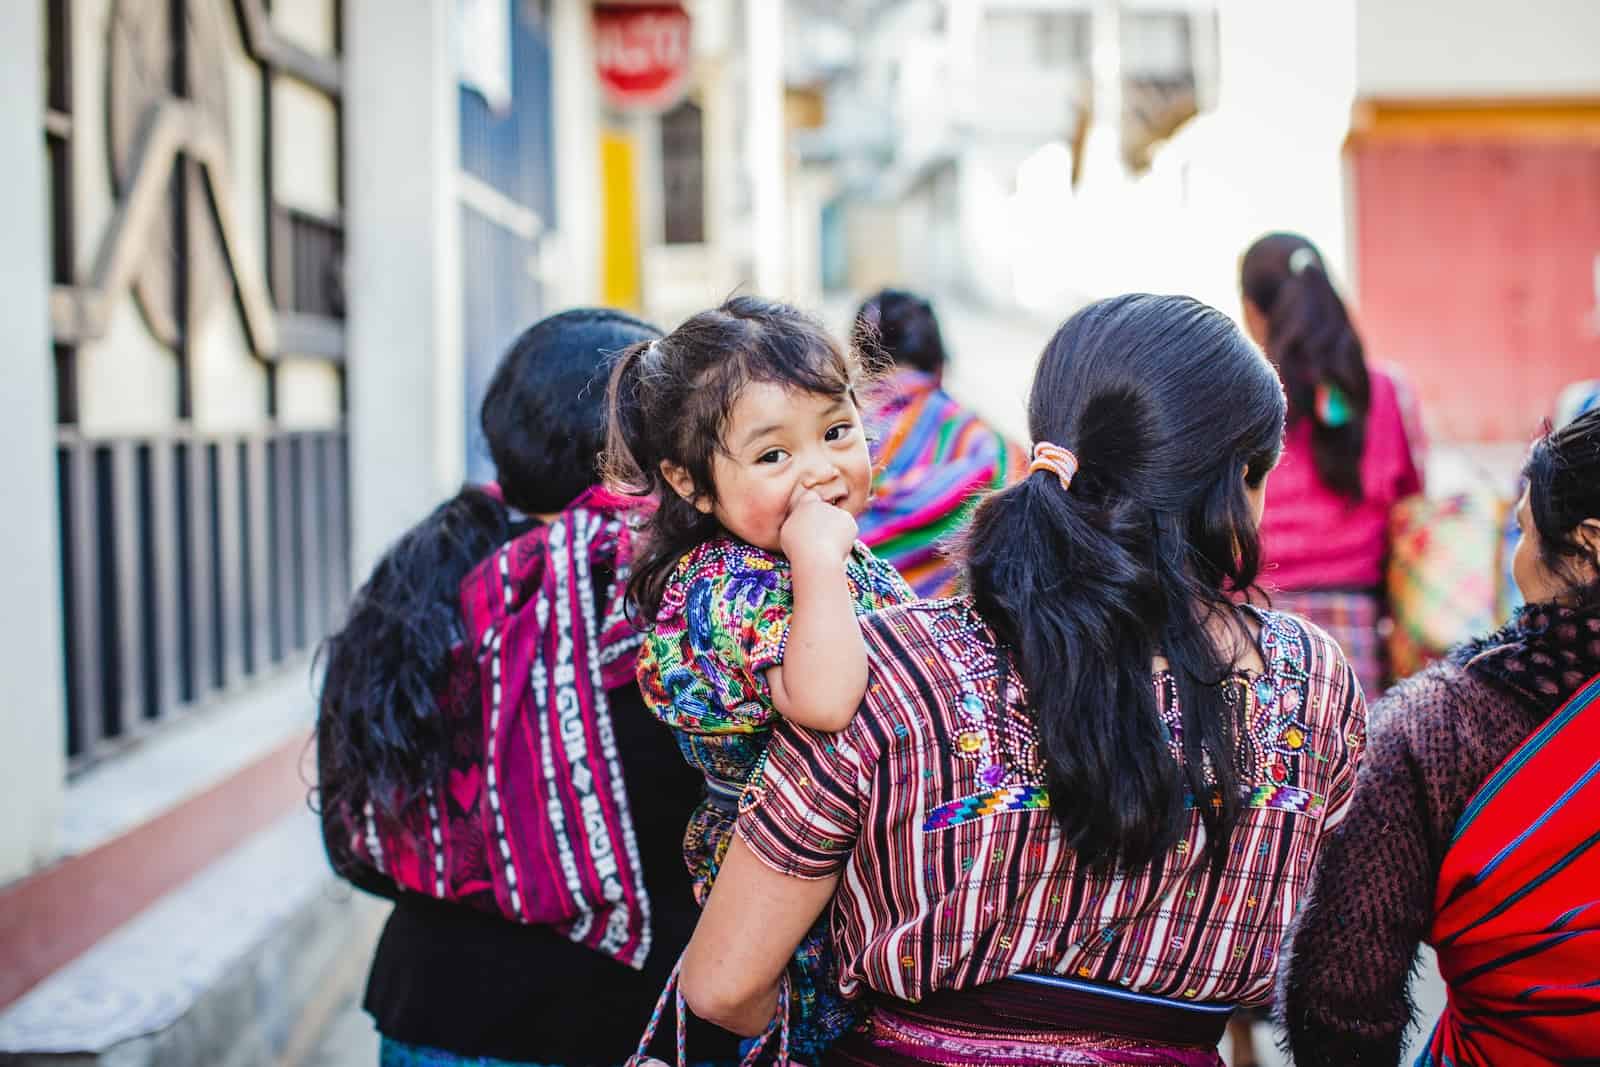 A baby is held by her mom, surrounded by other women walking down a street, wearing colorful clothing.